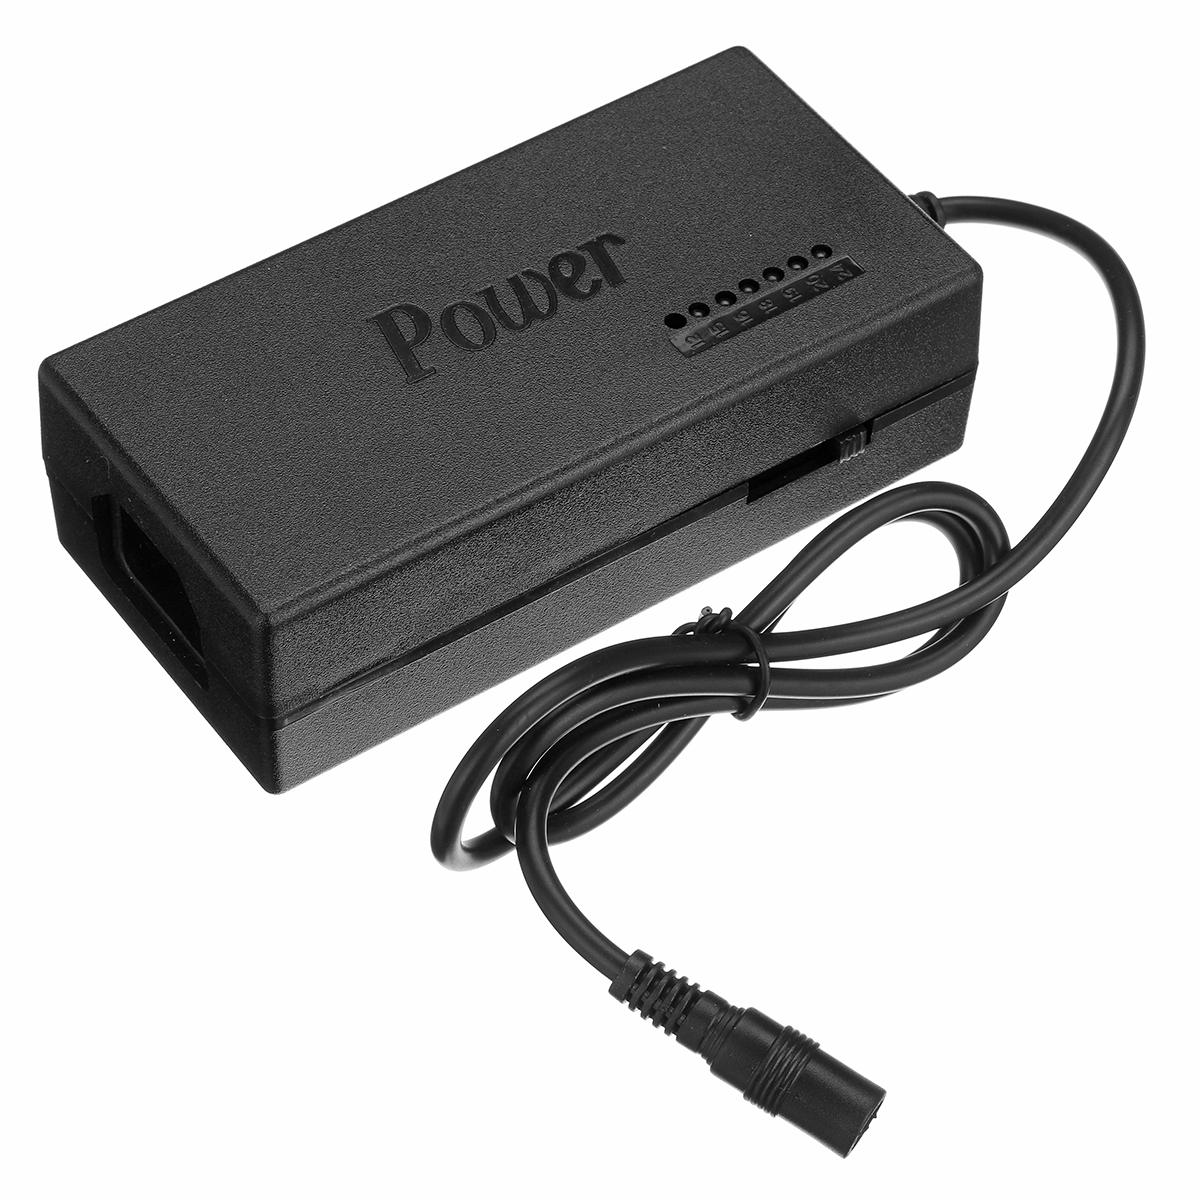 96W Universal Adjustable Notebook Power Adapter 12-24V AC DC 4.5A Power Supply for Laptop 2